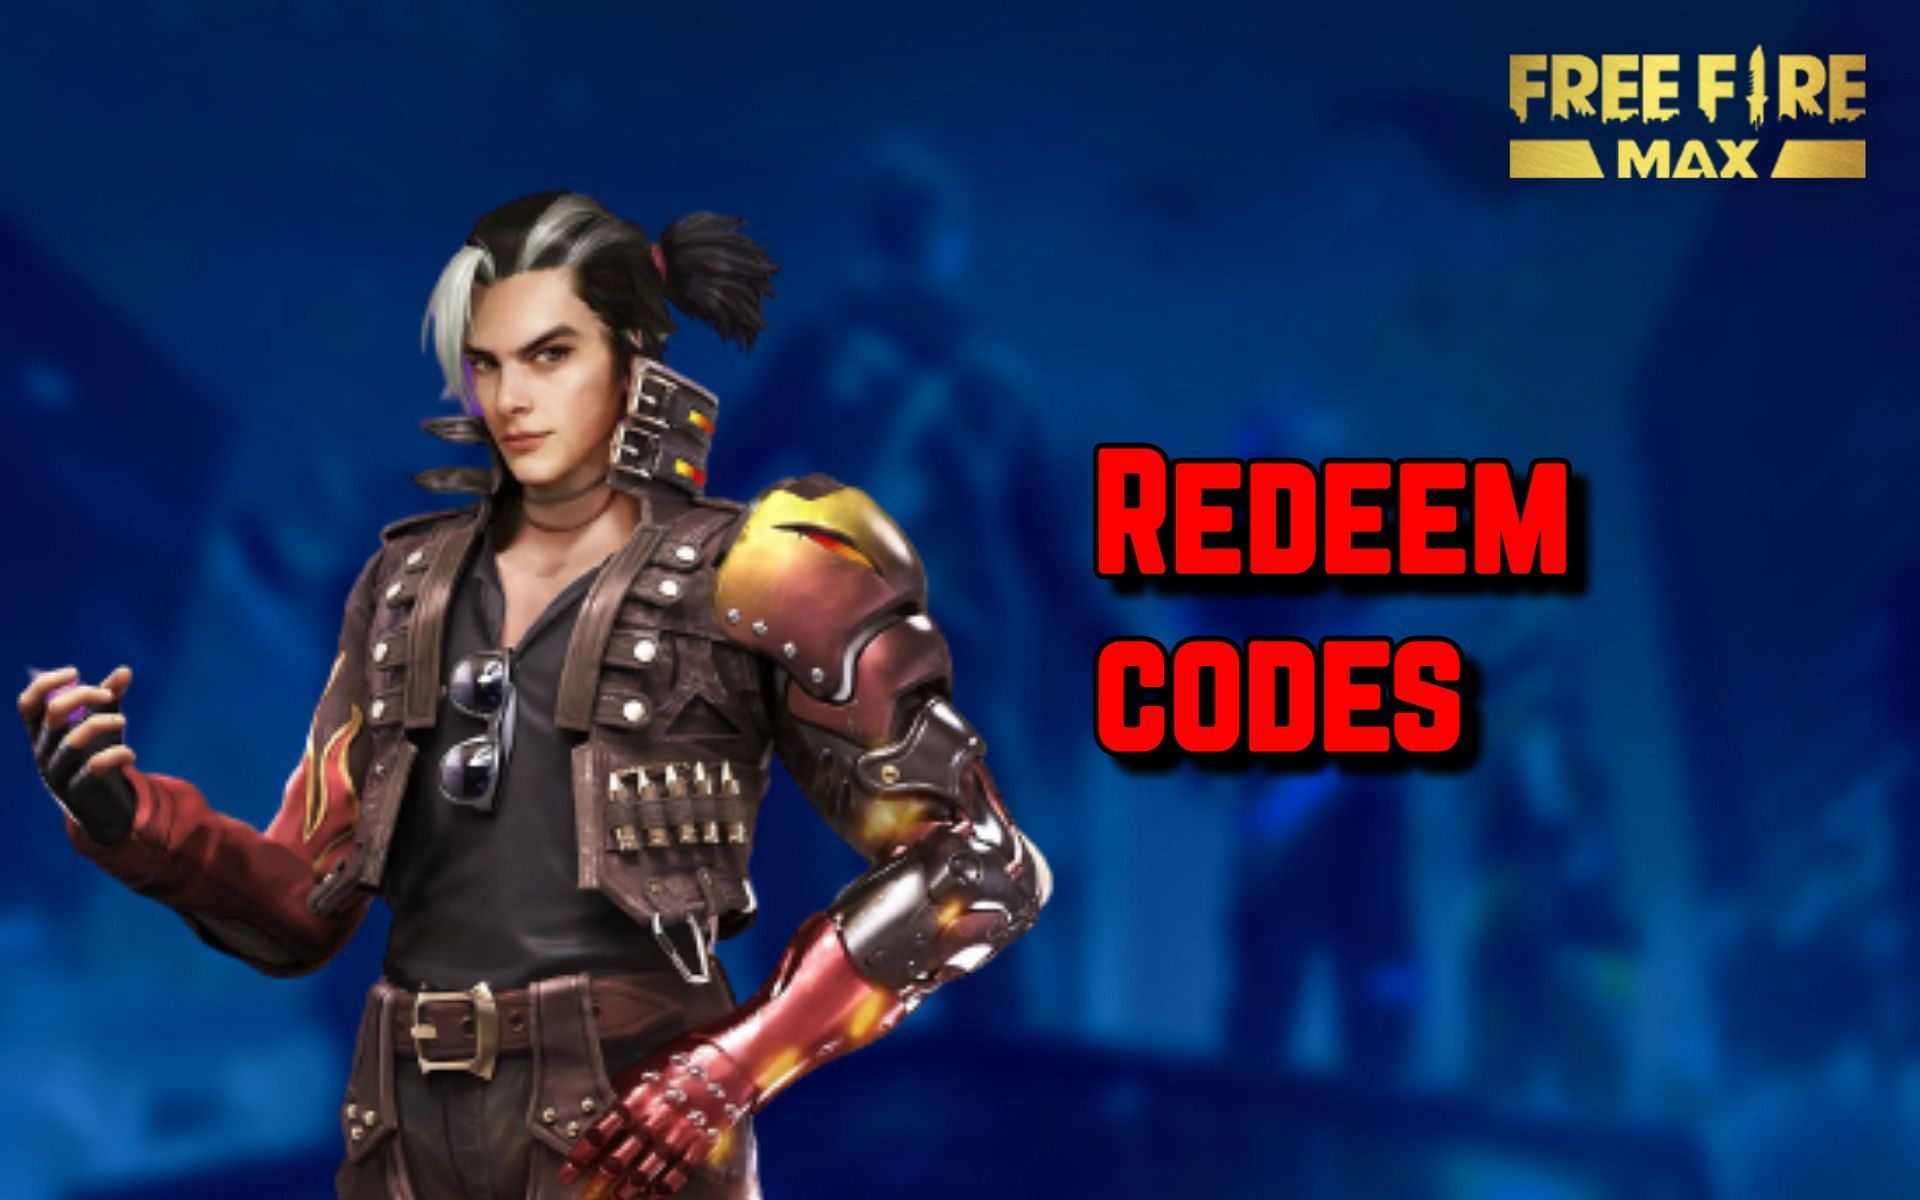 Free Fire redeem codes can offer players a variety of free rewards (Image via Sportskeeda)